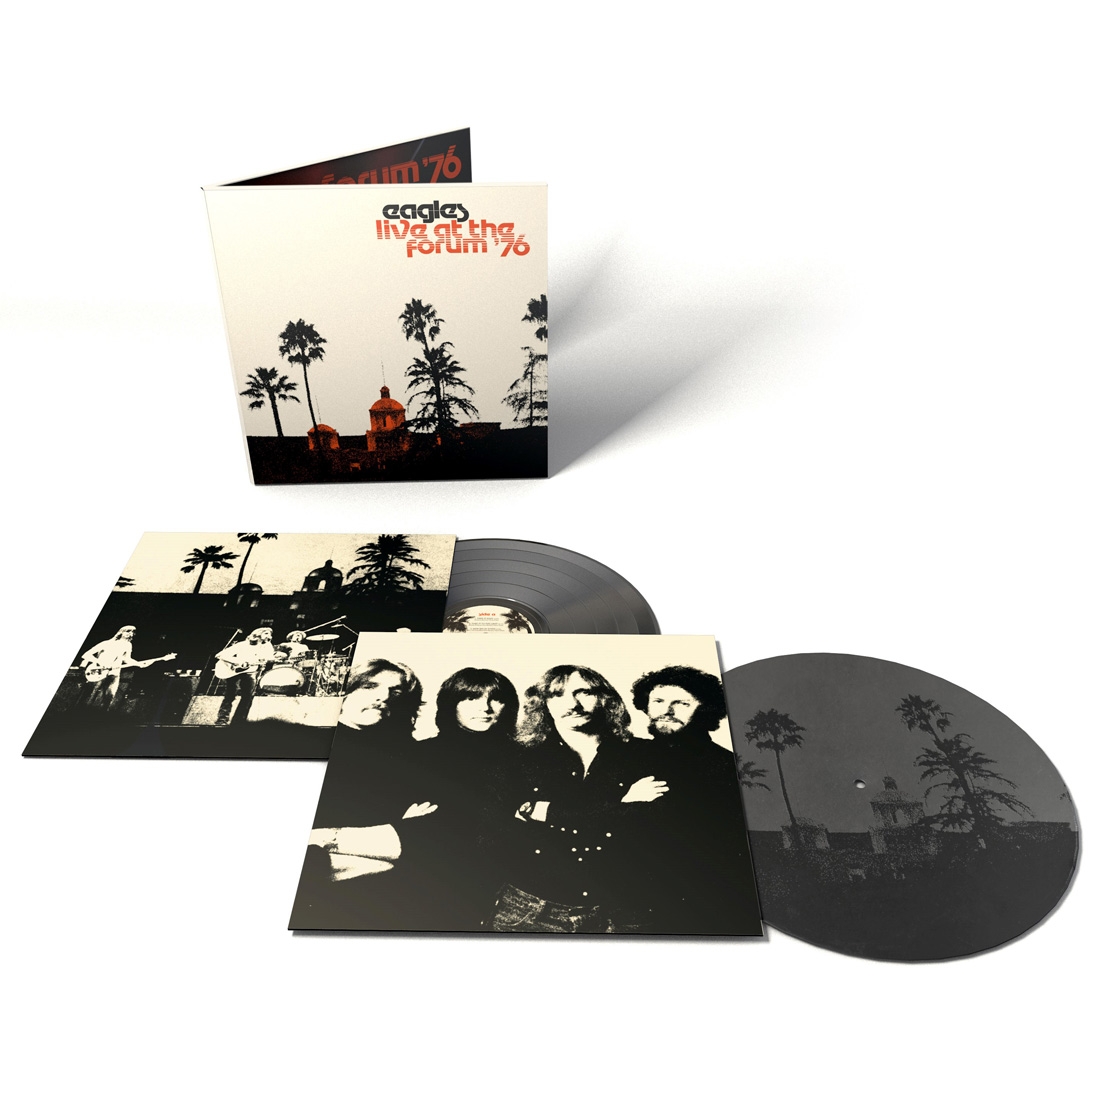 Live At The Forum 76 (2LP Black) | Dig! Store